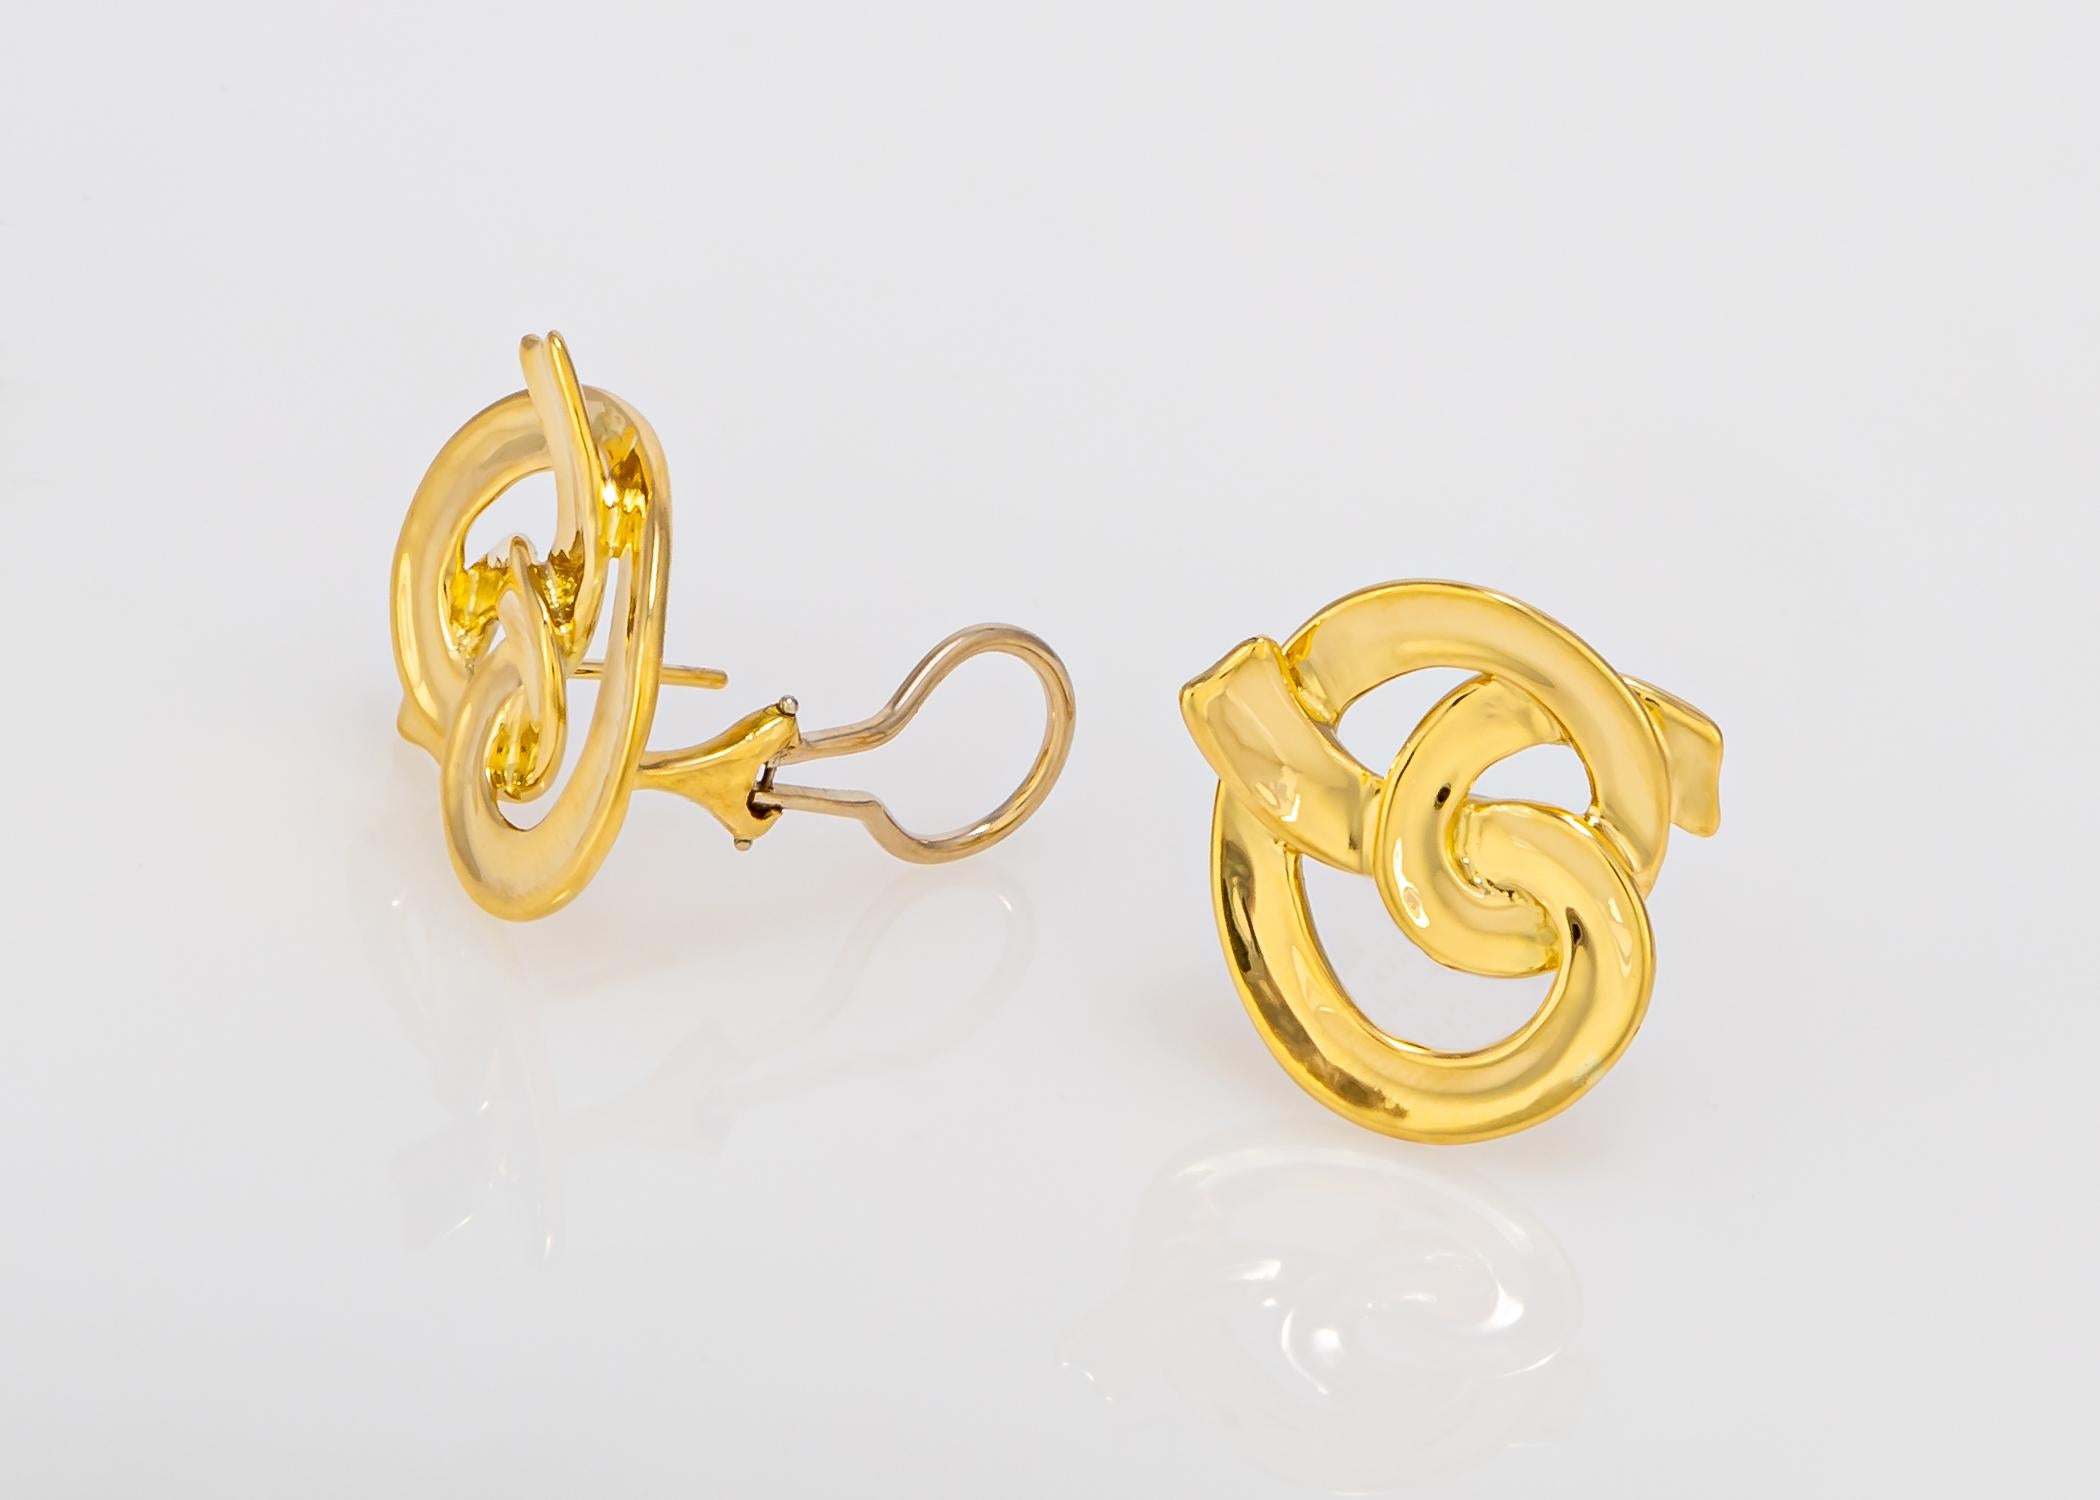 Angela Cummings Knot Motif Earring In Excellent Condition For Sale In Atlanta, GA